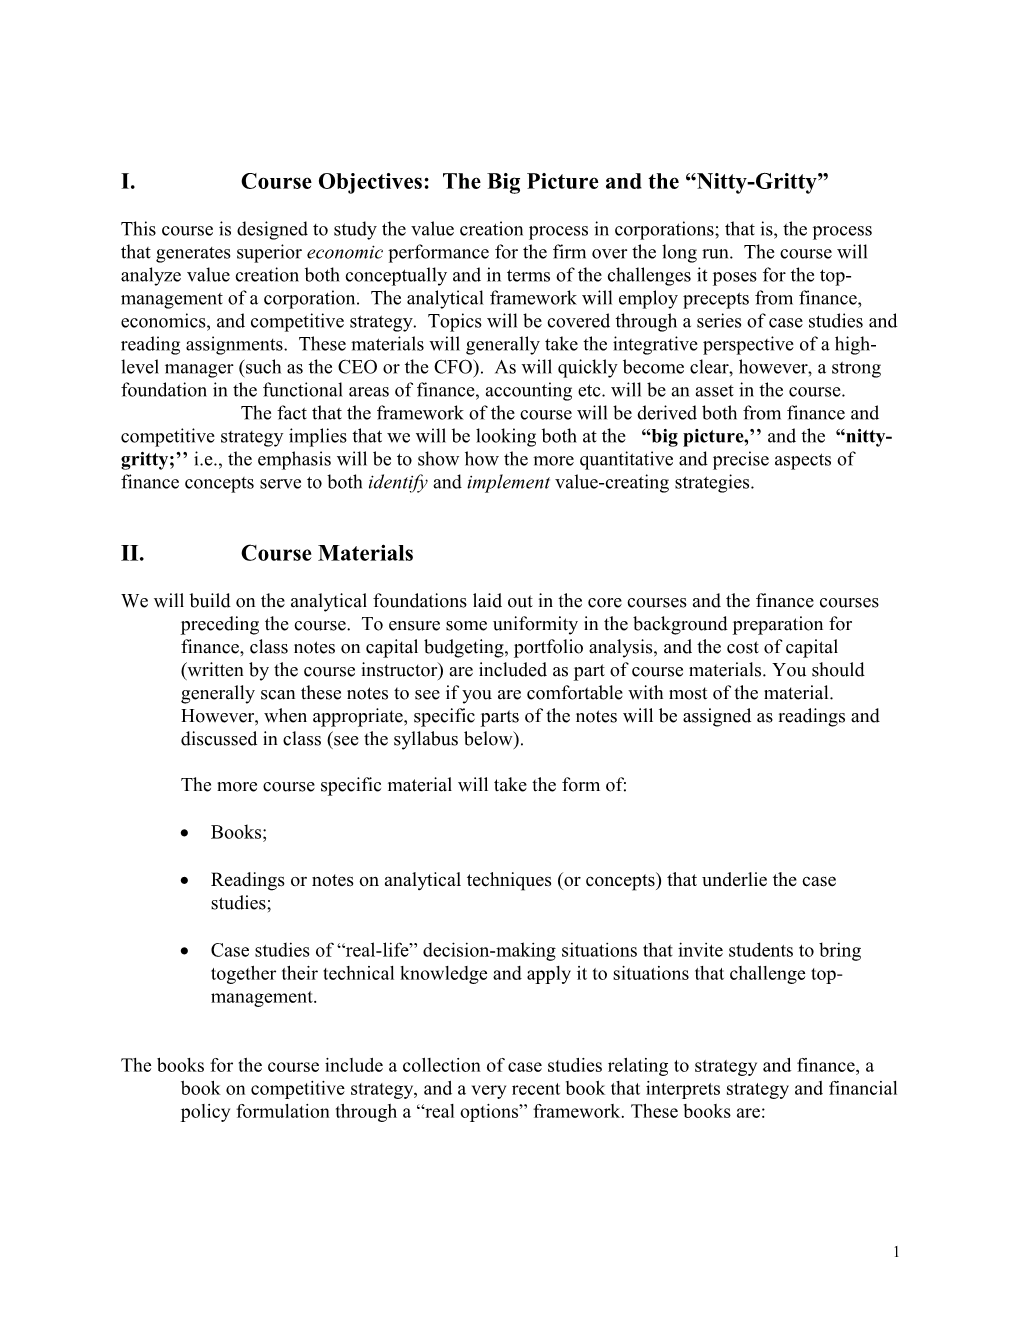 I. Course Objectives: the Big Picture and the Nitty-Gritty